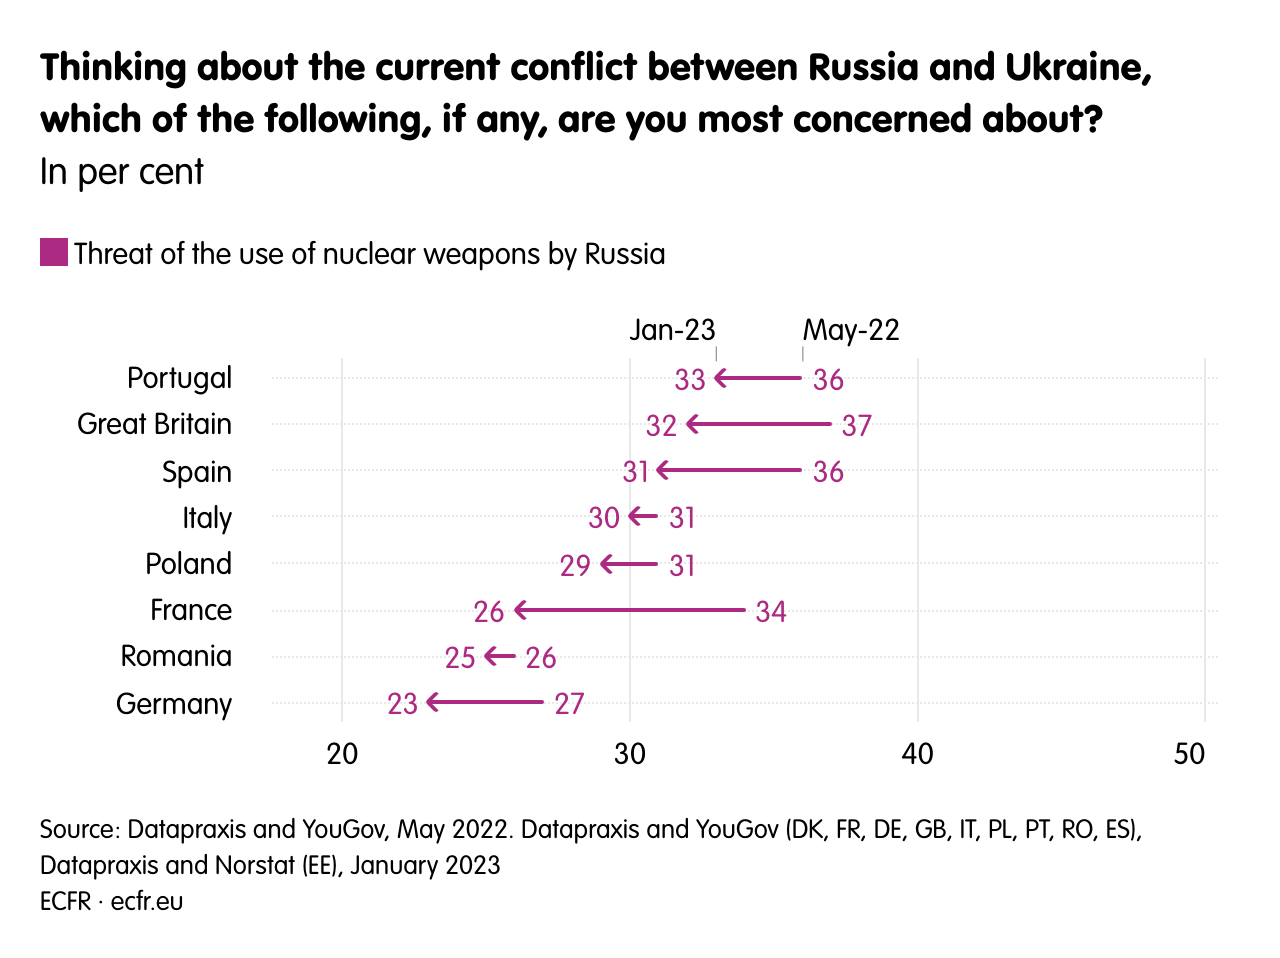 Thinking about the current conflict between Russia and Ukraine, which of the following, if any, are you most concerned about?